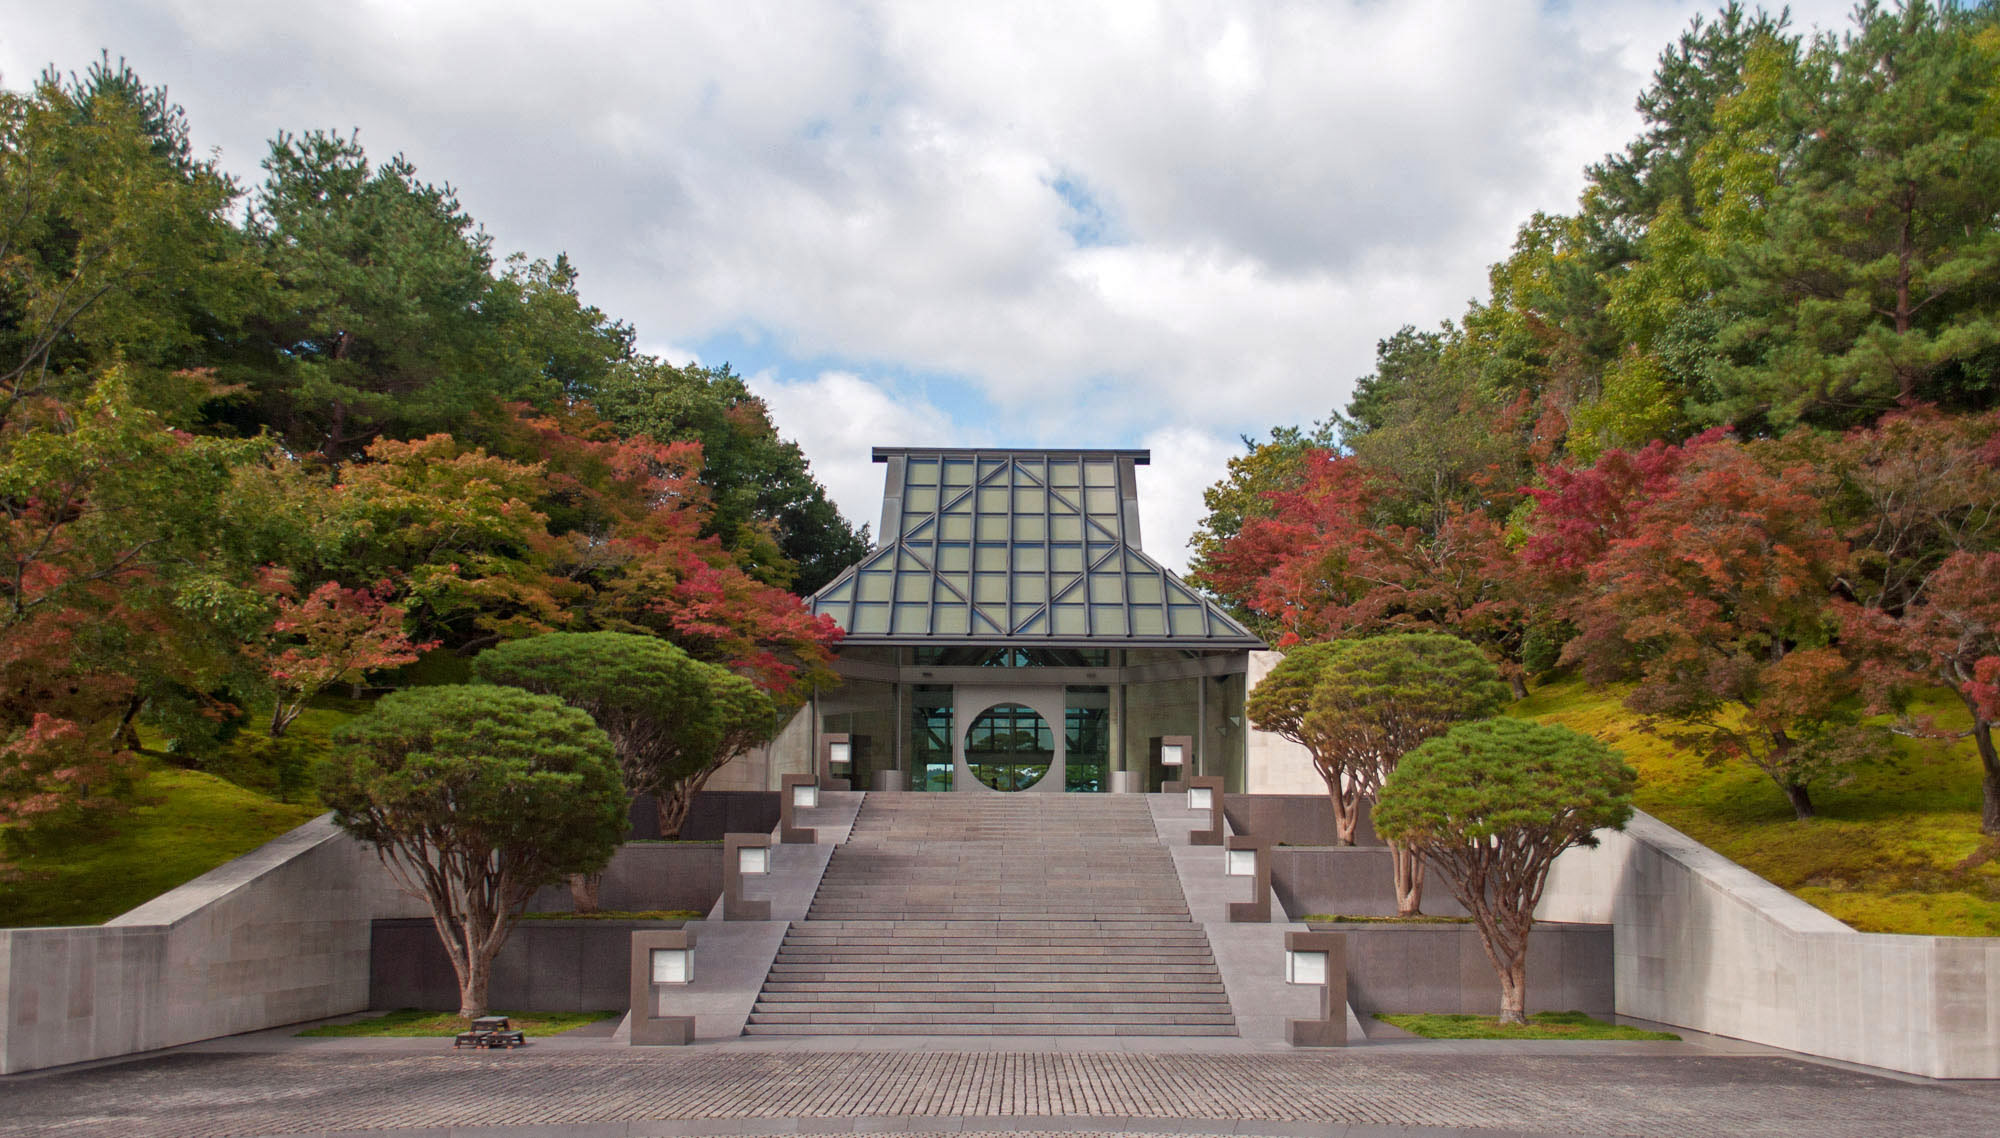 MIHO MUSEUM in Japan designed by I.M.Pei 